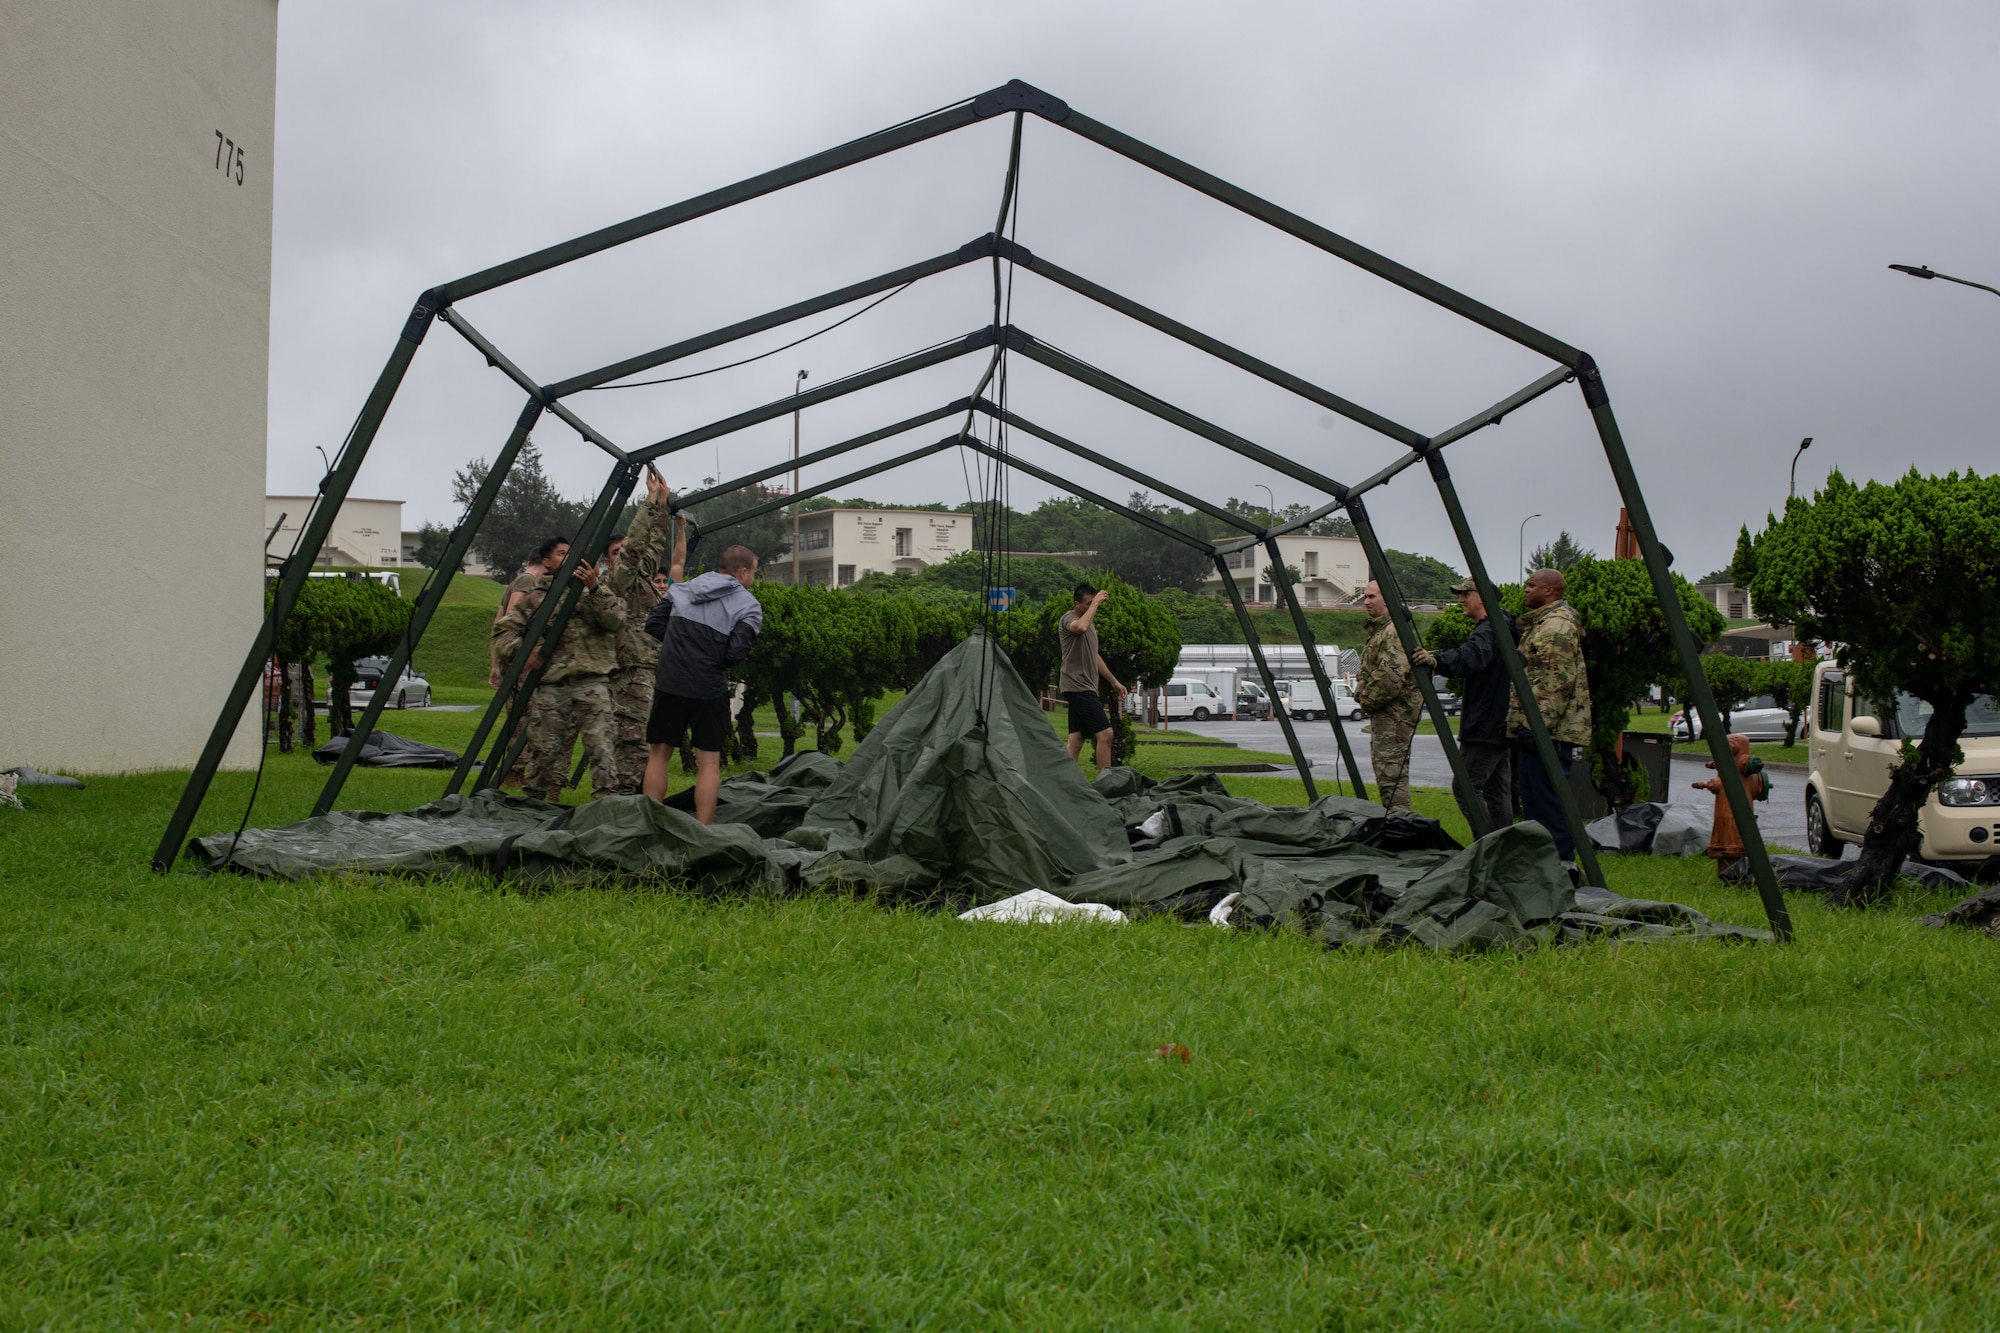 Airmen set up a tent for a Command and Control center during Pacific Iron.